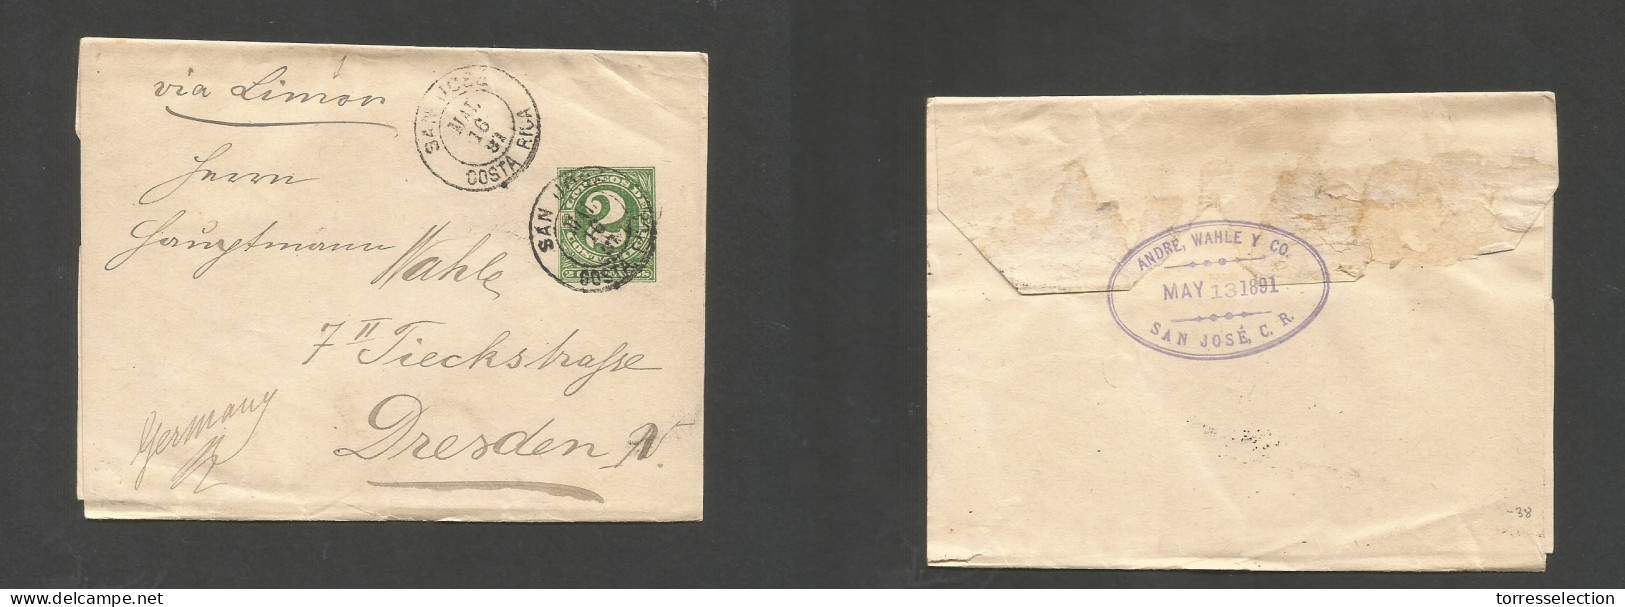 COSTA RICA. 1891 (16 March) San Jose - Germany, Dresden Via Limon 2c Green Complete Stat Wrapper, Cds. VF Used. - Costa Rica